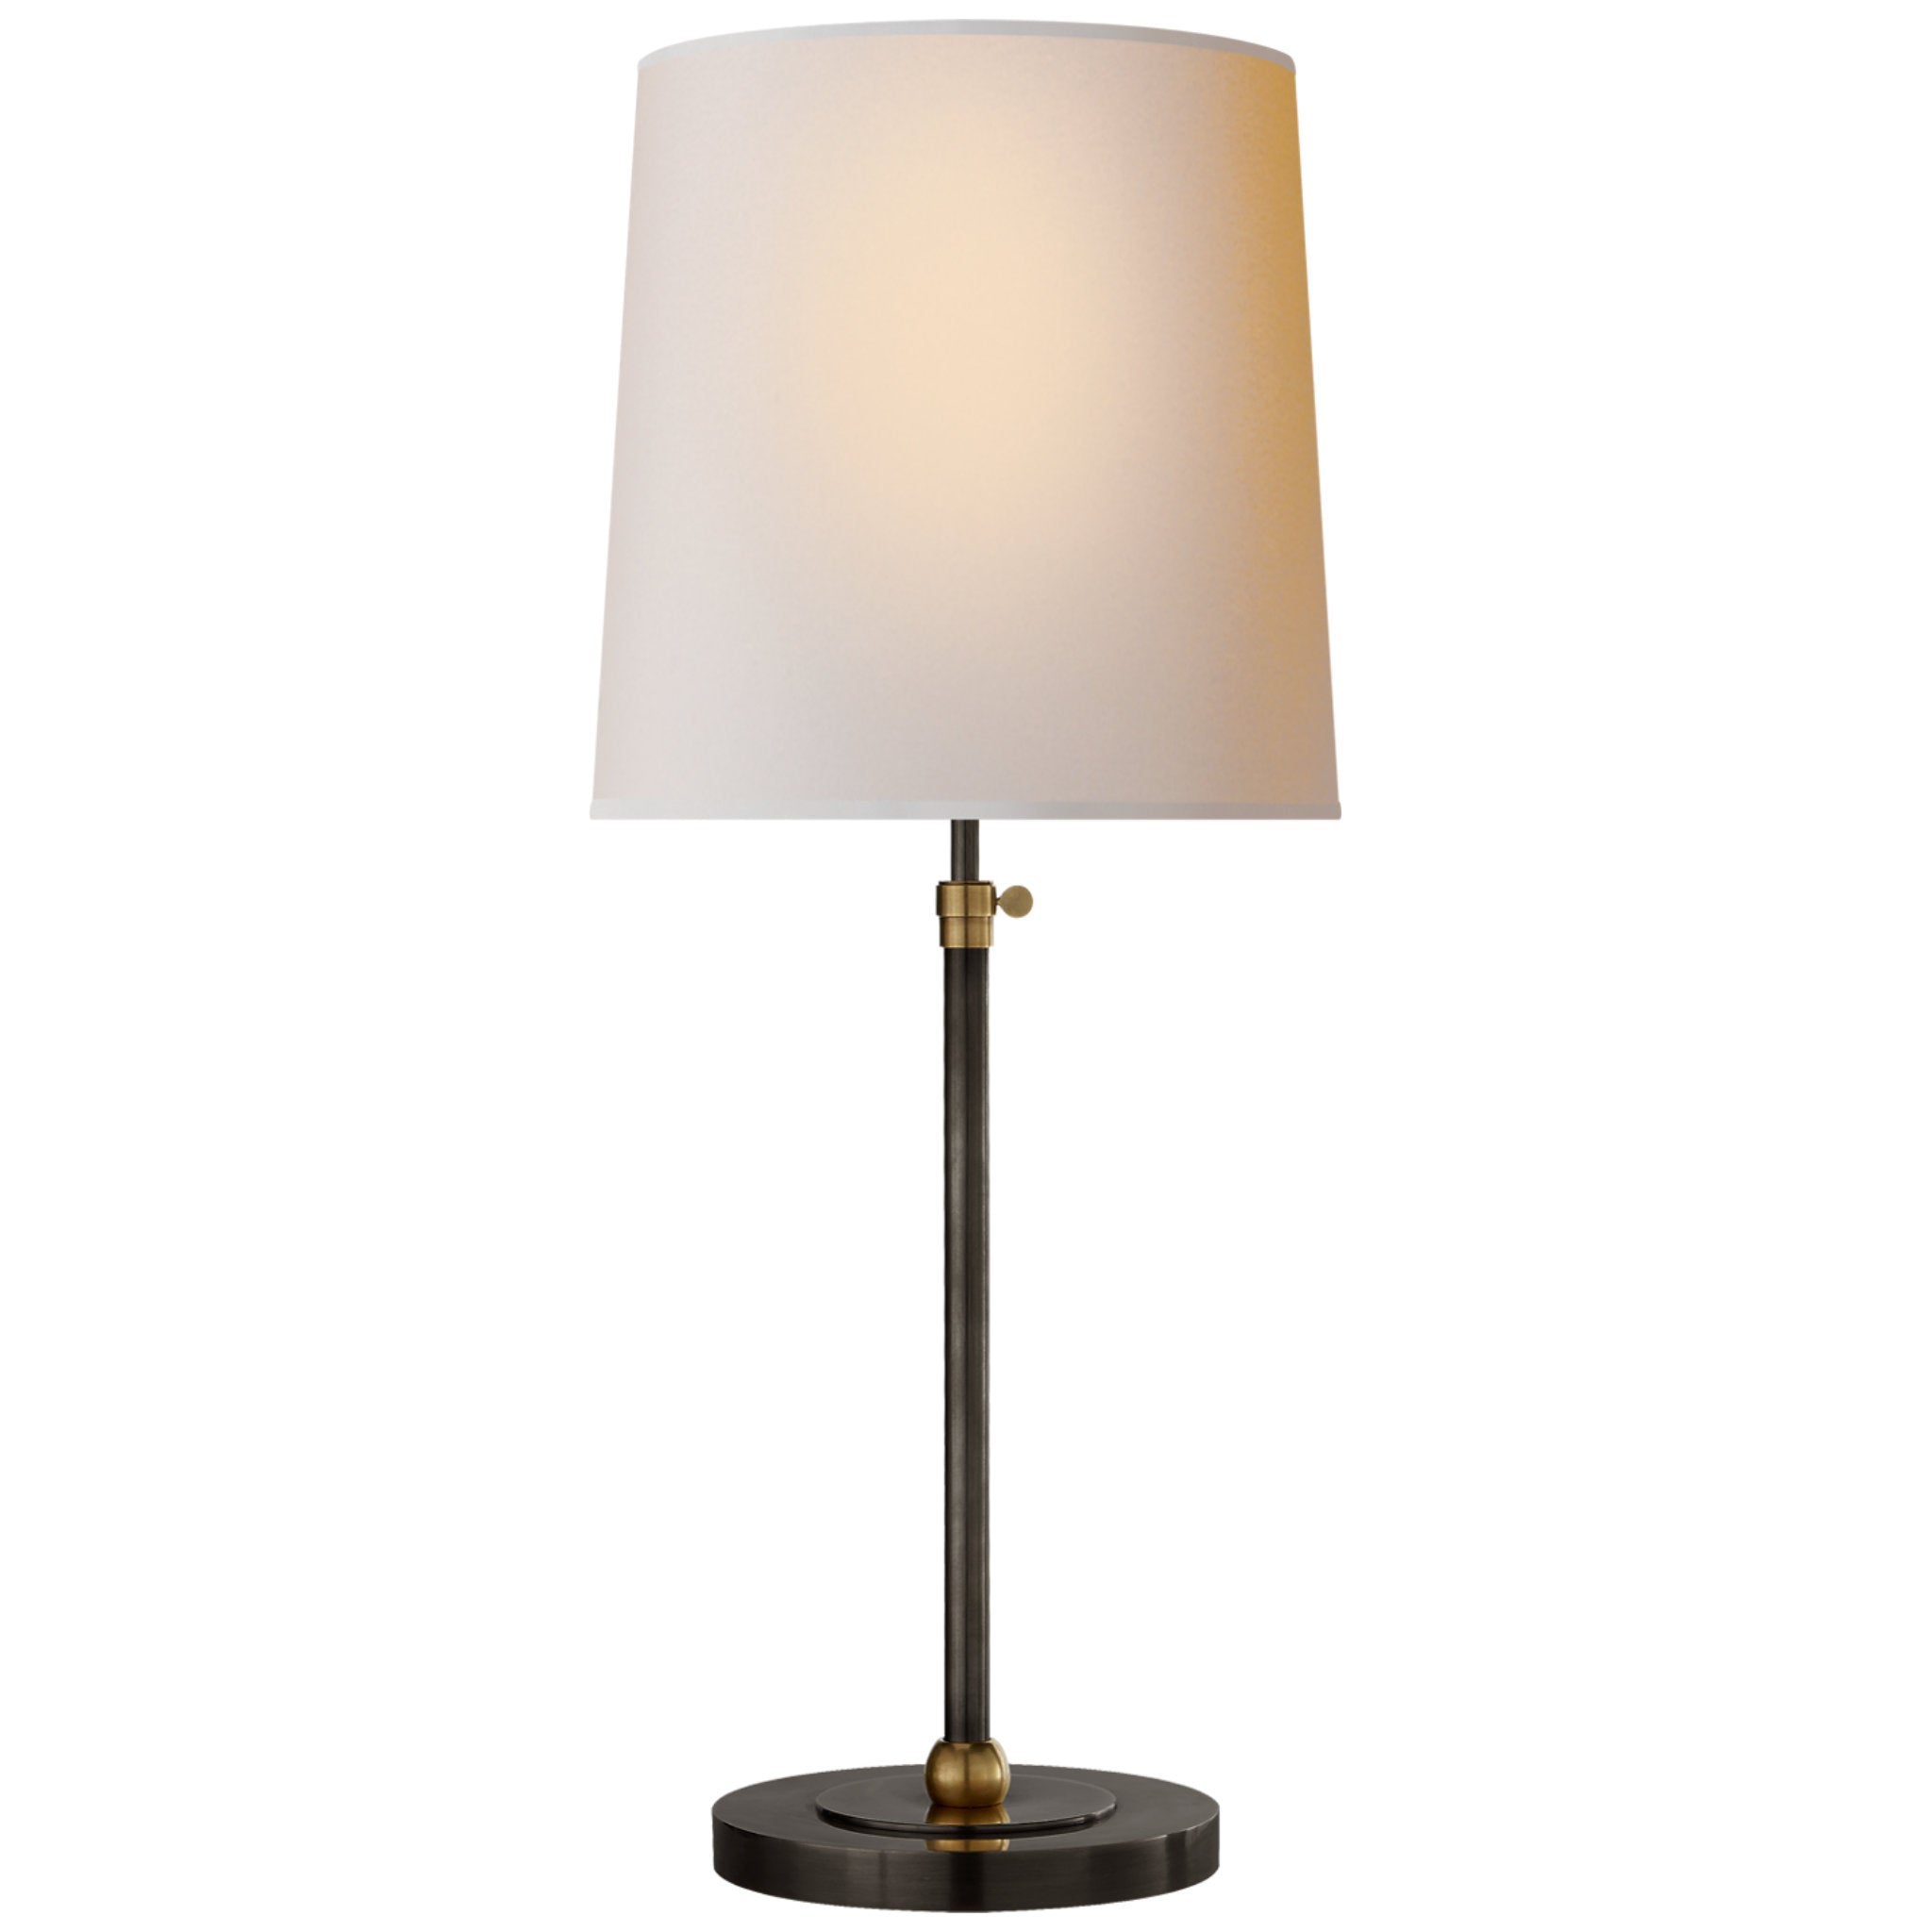 Thomas O'Brien Bryant Large Table Lamp in Bronze and Hand-Rubbed Antique Brass with Natural Paper Shade